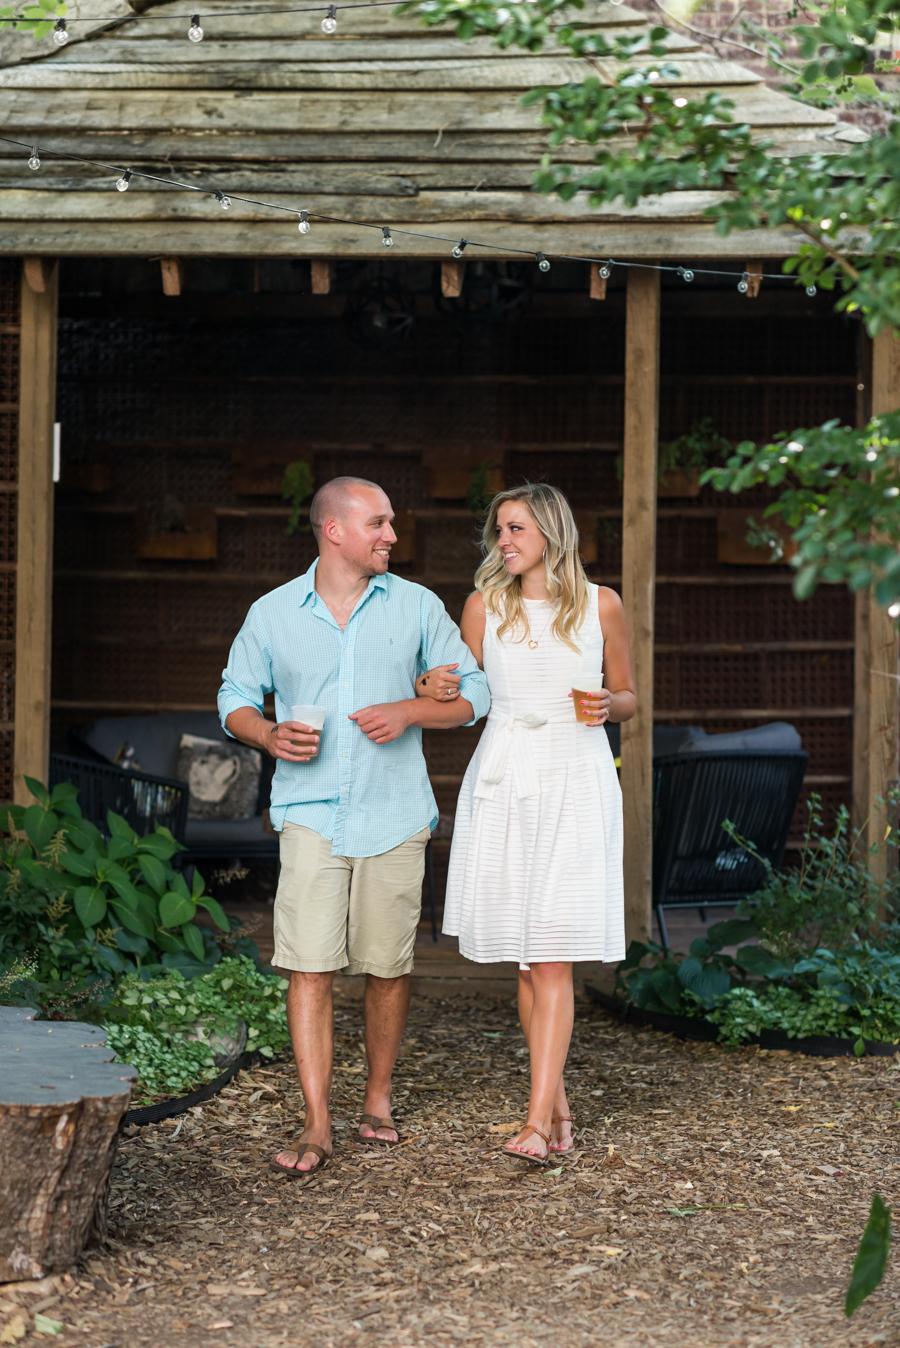 Charming Engagement Session at PHS Pop Up Garden South Street Emerald Stone Photography Philly In Love Philadelphia Wedding Blog Philadelphia Weddings Venues Vendors